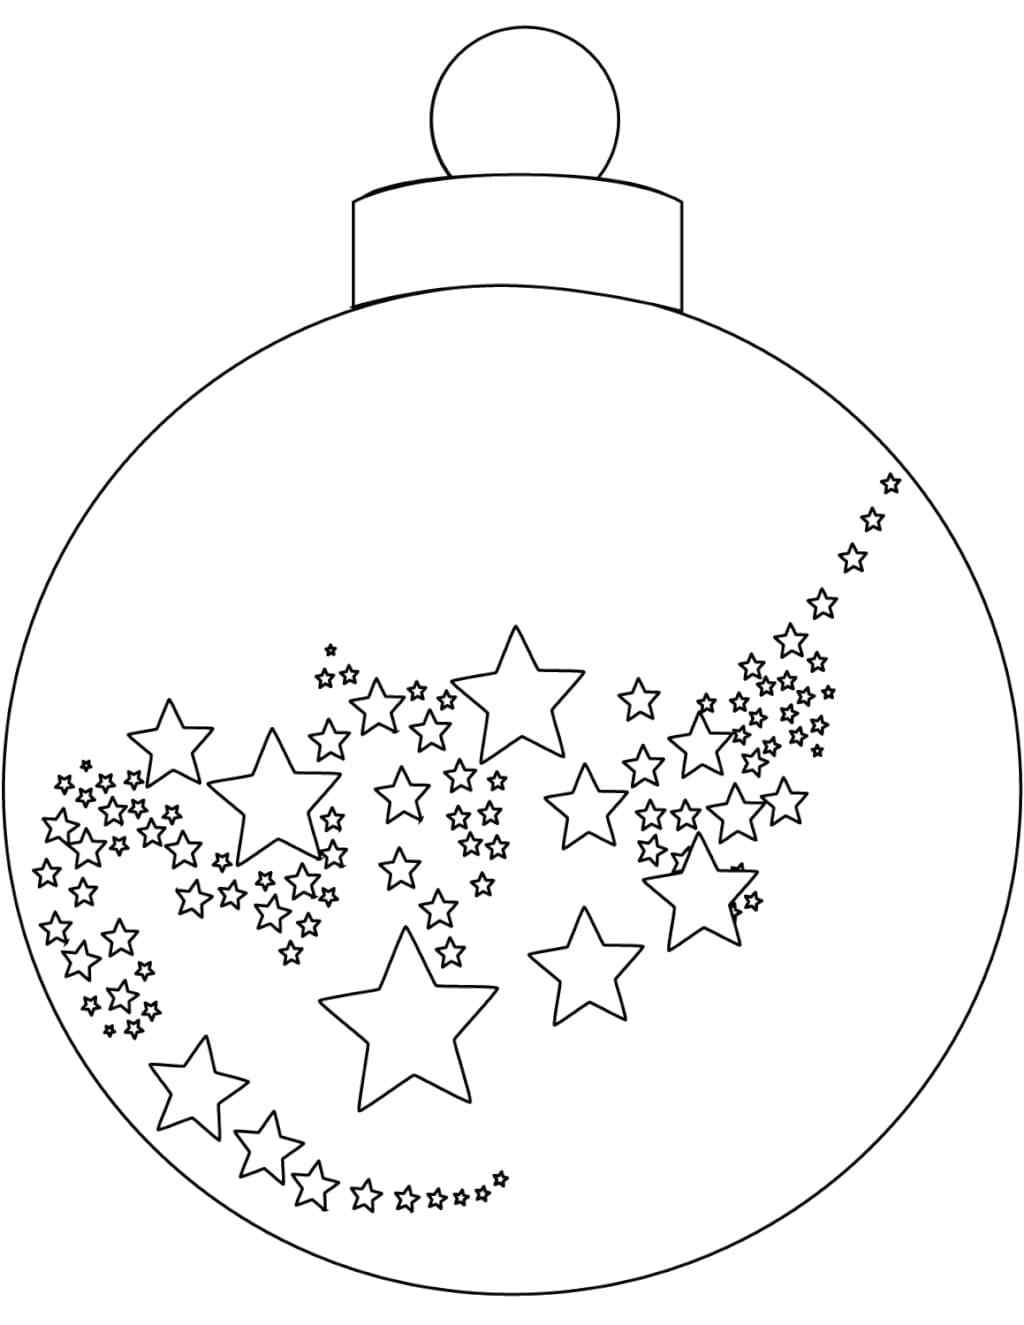 A Scattering Of Stars Is Depicted On Christmas Ornaments Coloring Page